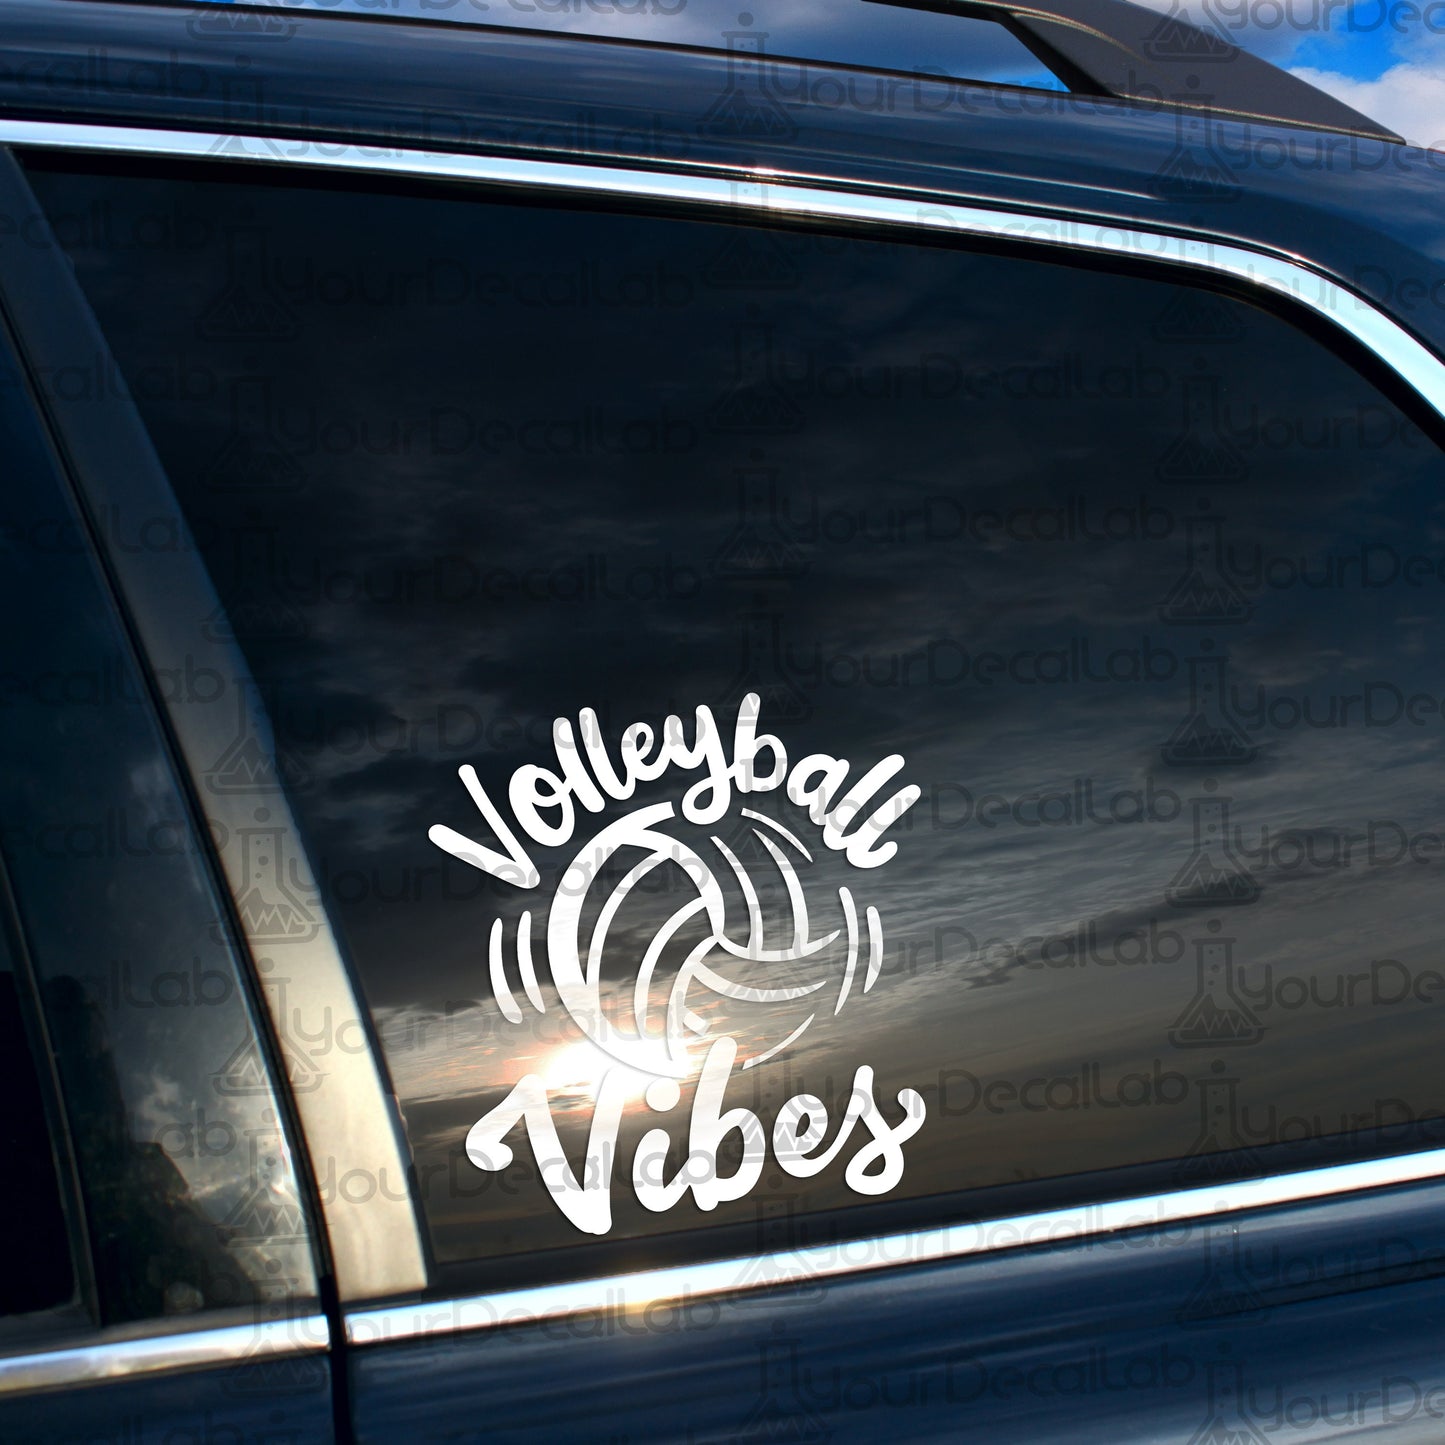 volleyball vibes sticker on the side of a car